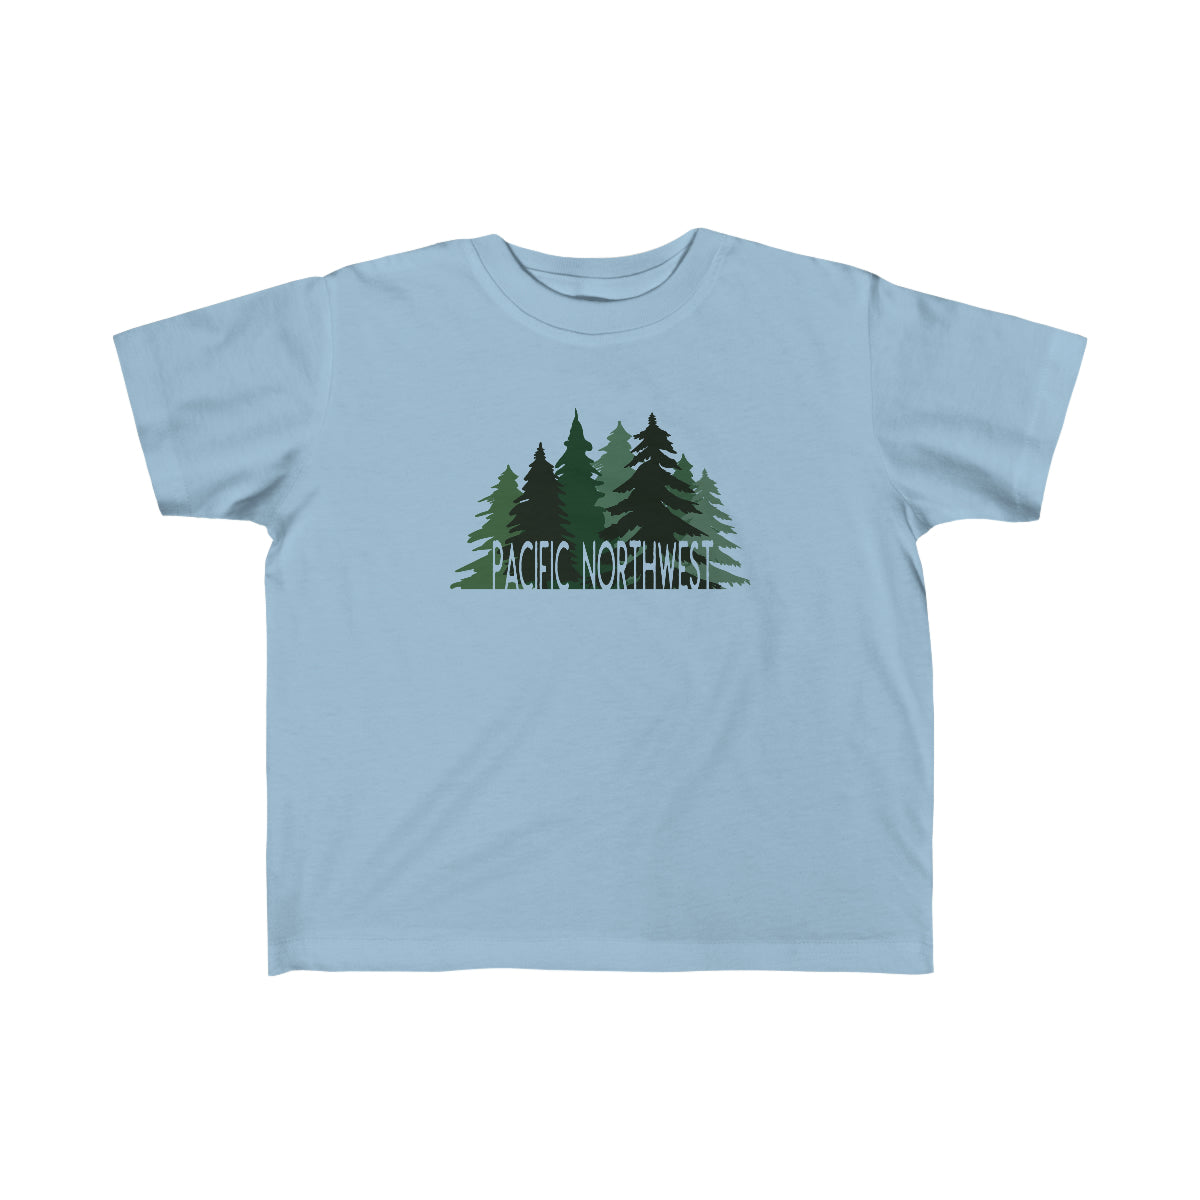 Pacific Northwest Forest Toddler Tee Light Blue / 2T - The Northwest Store